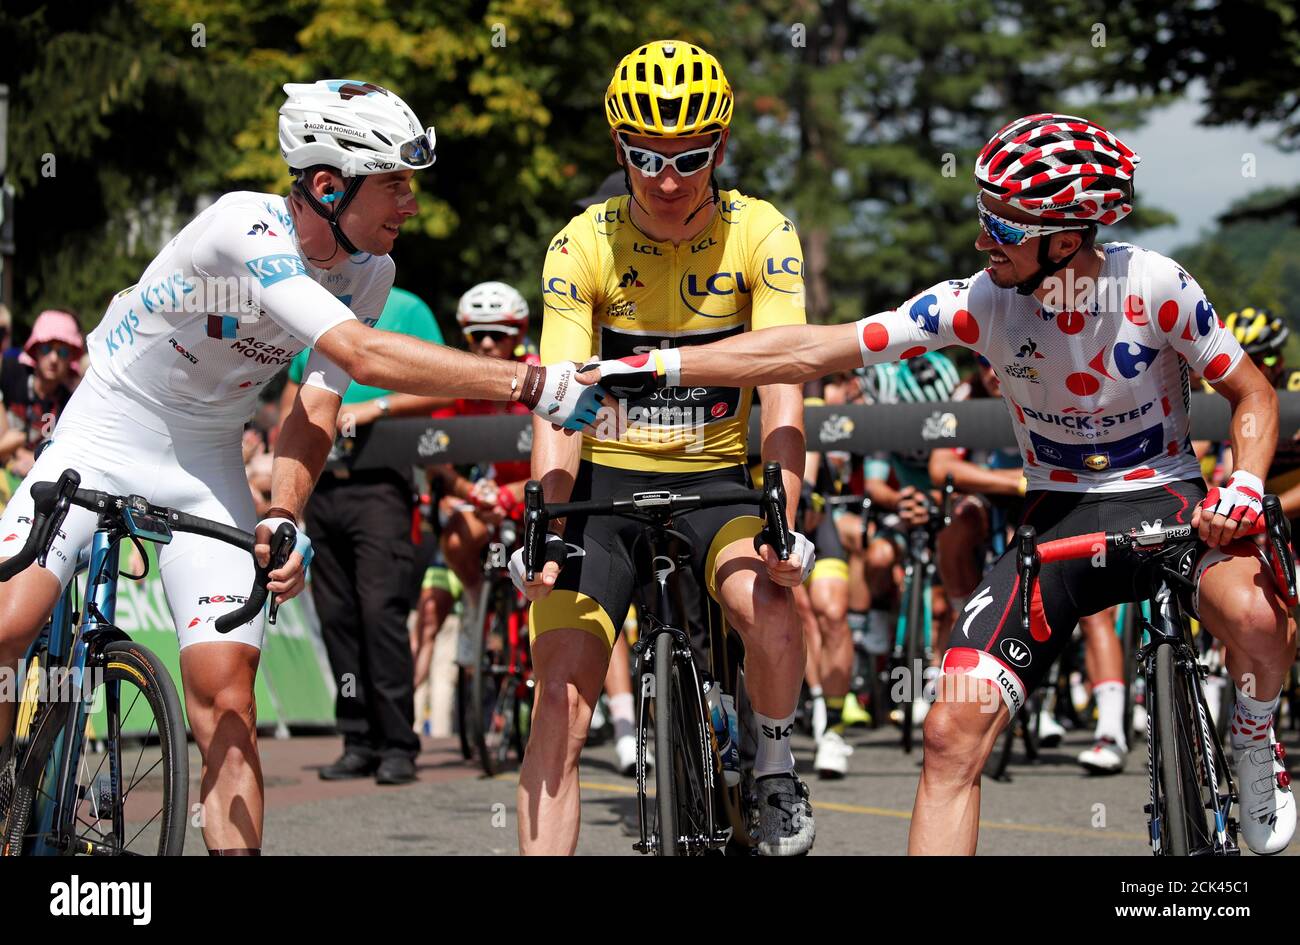 Cycling - Tour de France - The 200.5-km Stage 19 from Lourdes to Laruns -  July 27, 2018 - Team Sky rider Geraint Thomas of Britain, wearing the  overall leader's yellow jersey,